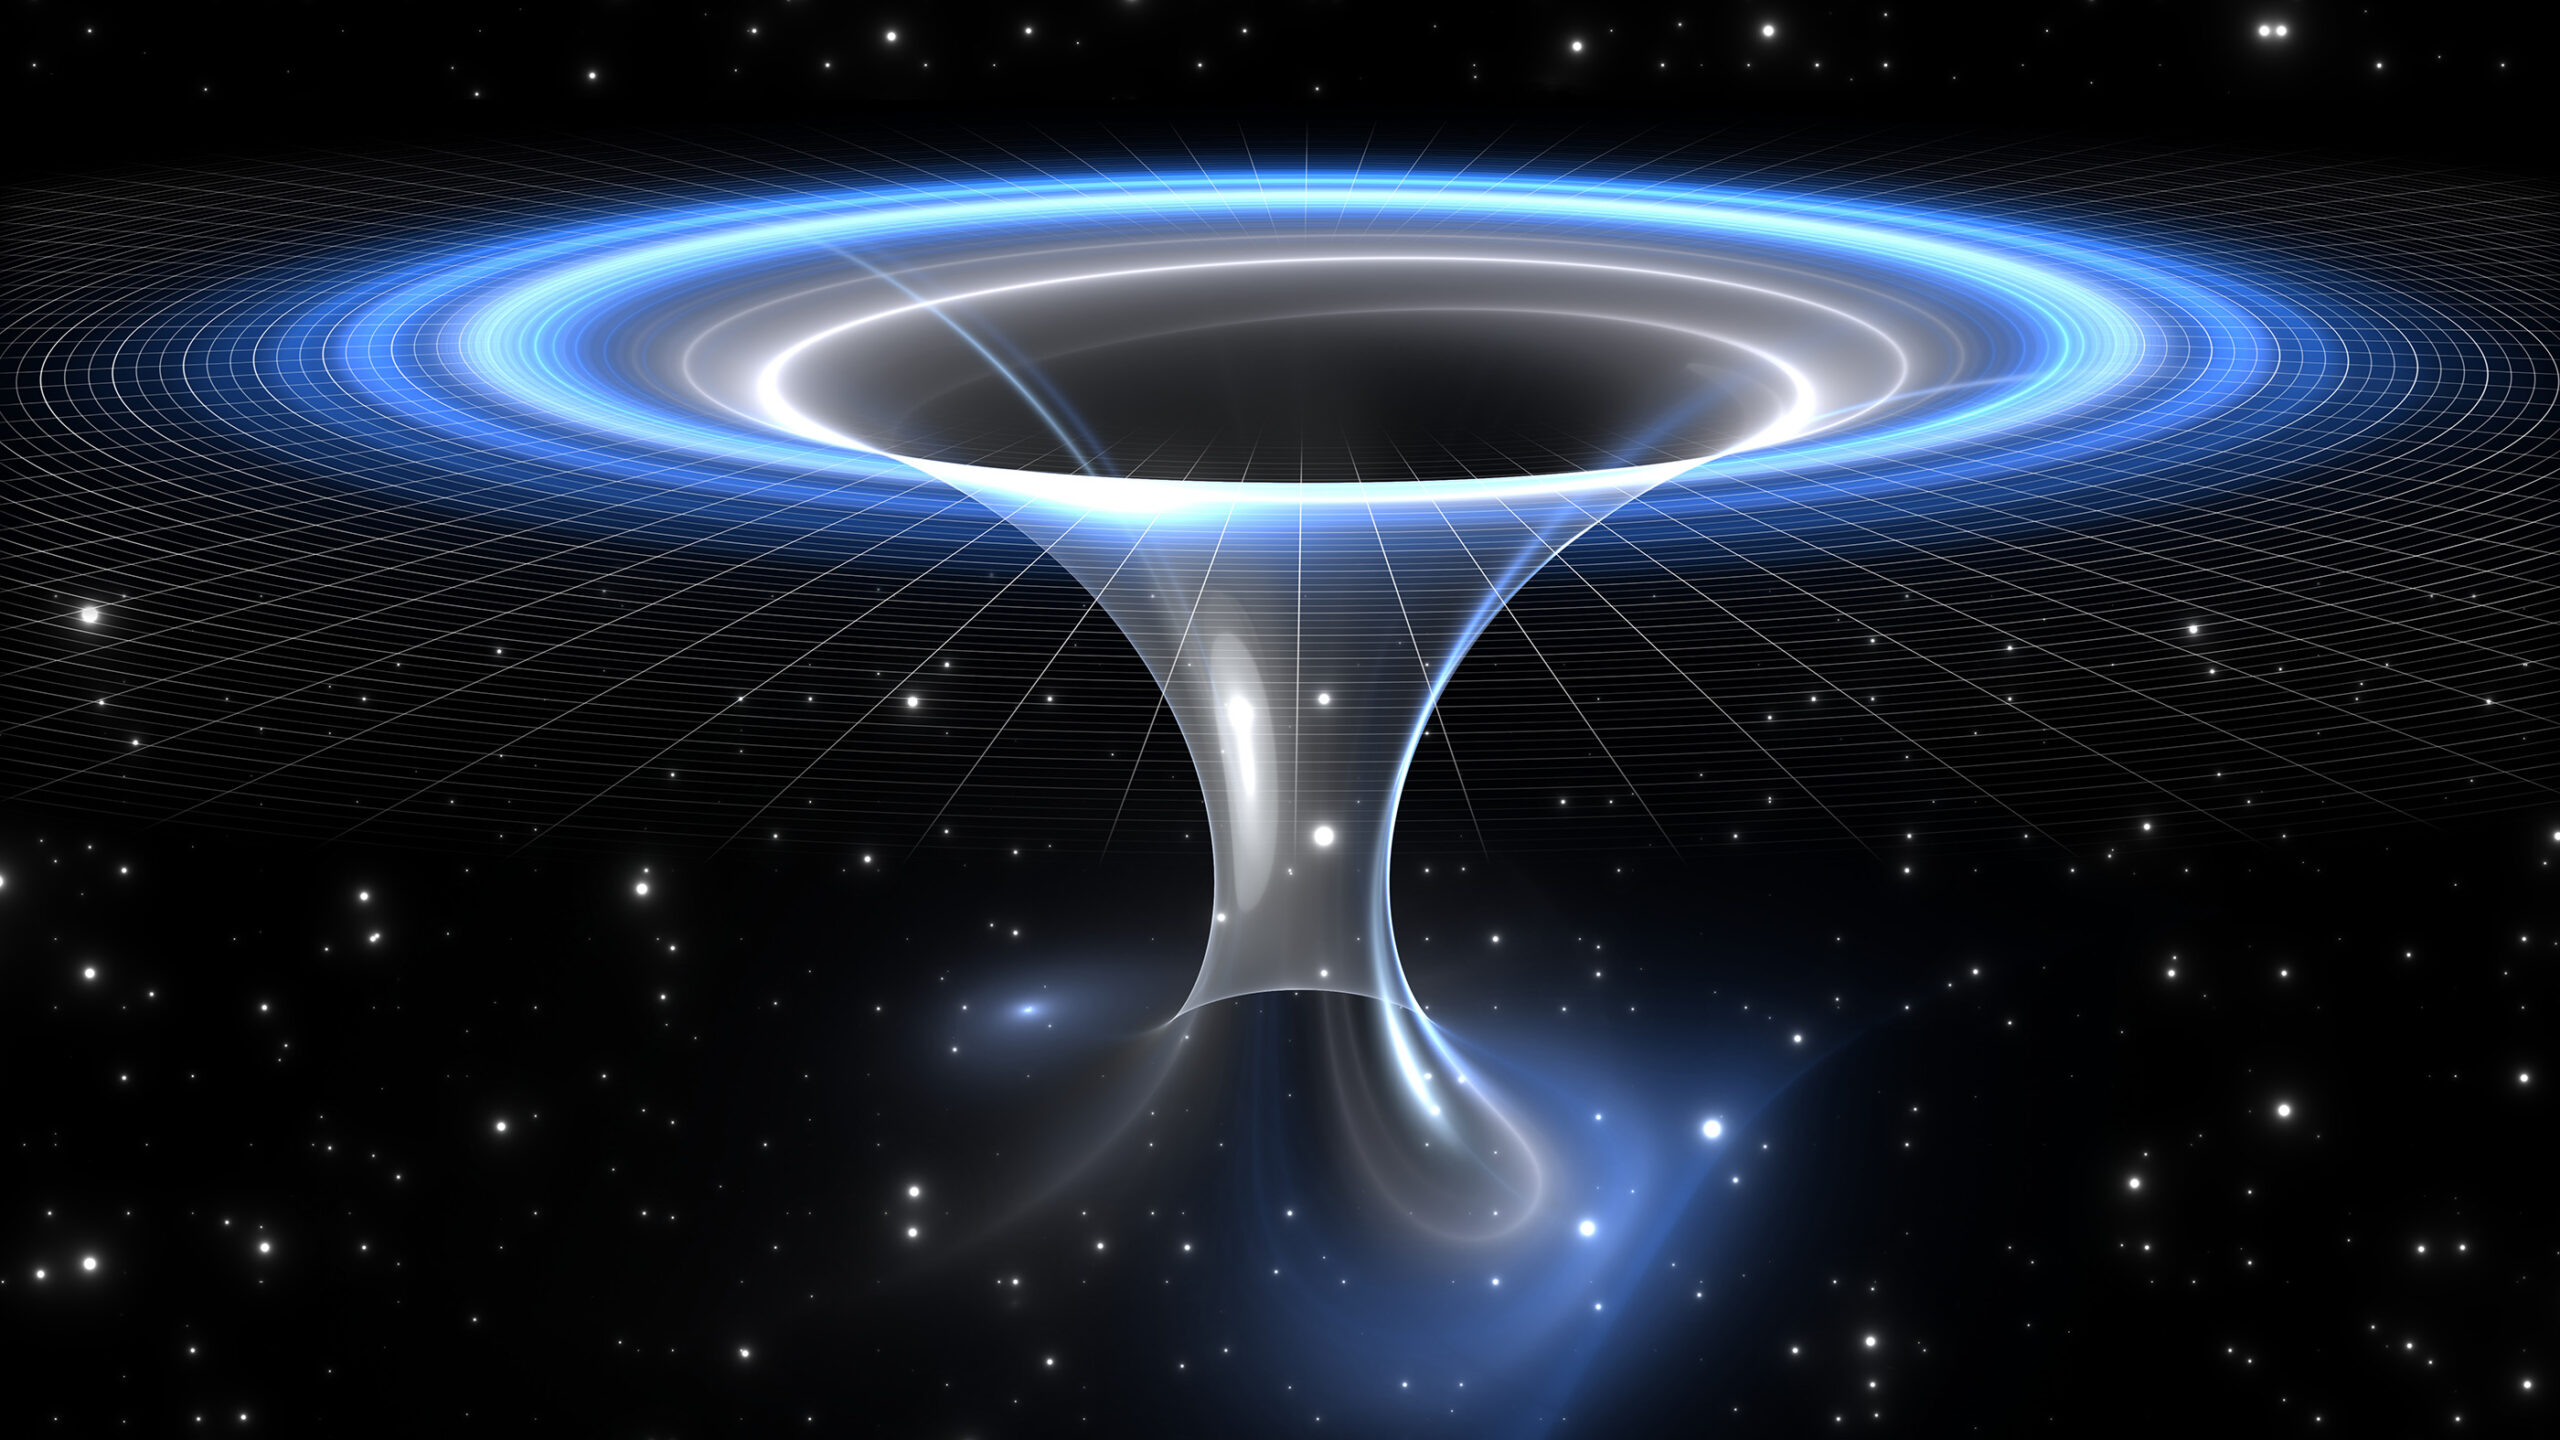 Scientists Suggest That Entities Once Believed to be Black Holes Might Actually Be Wormholes